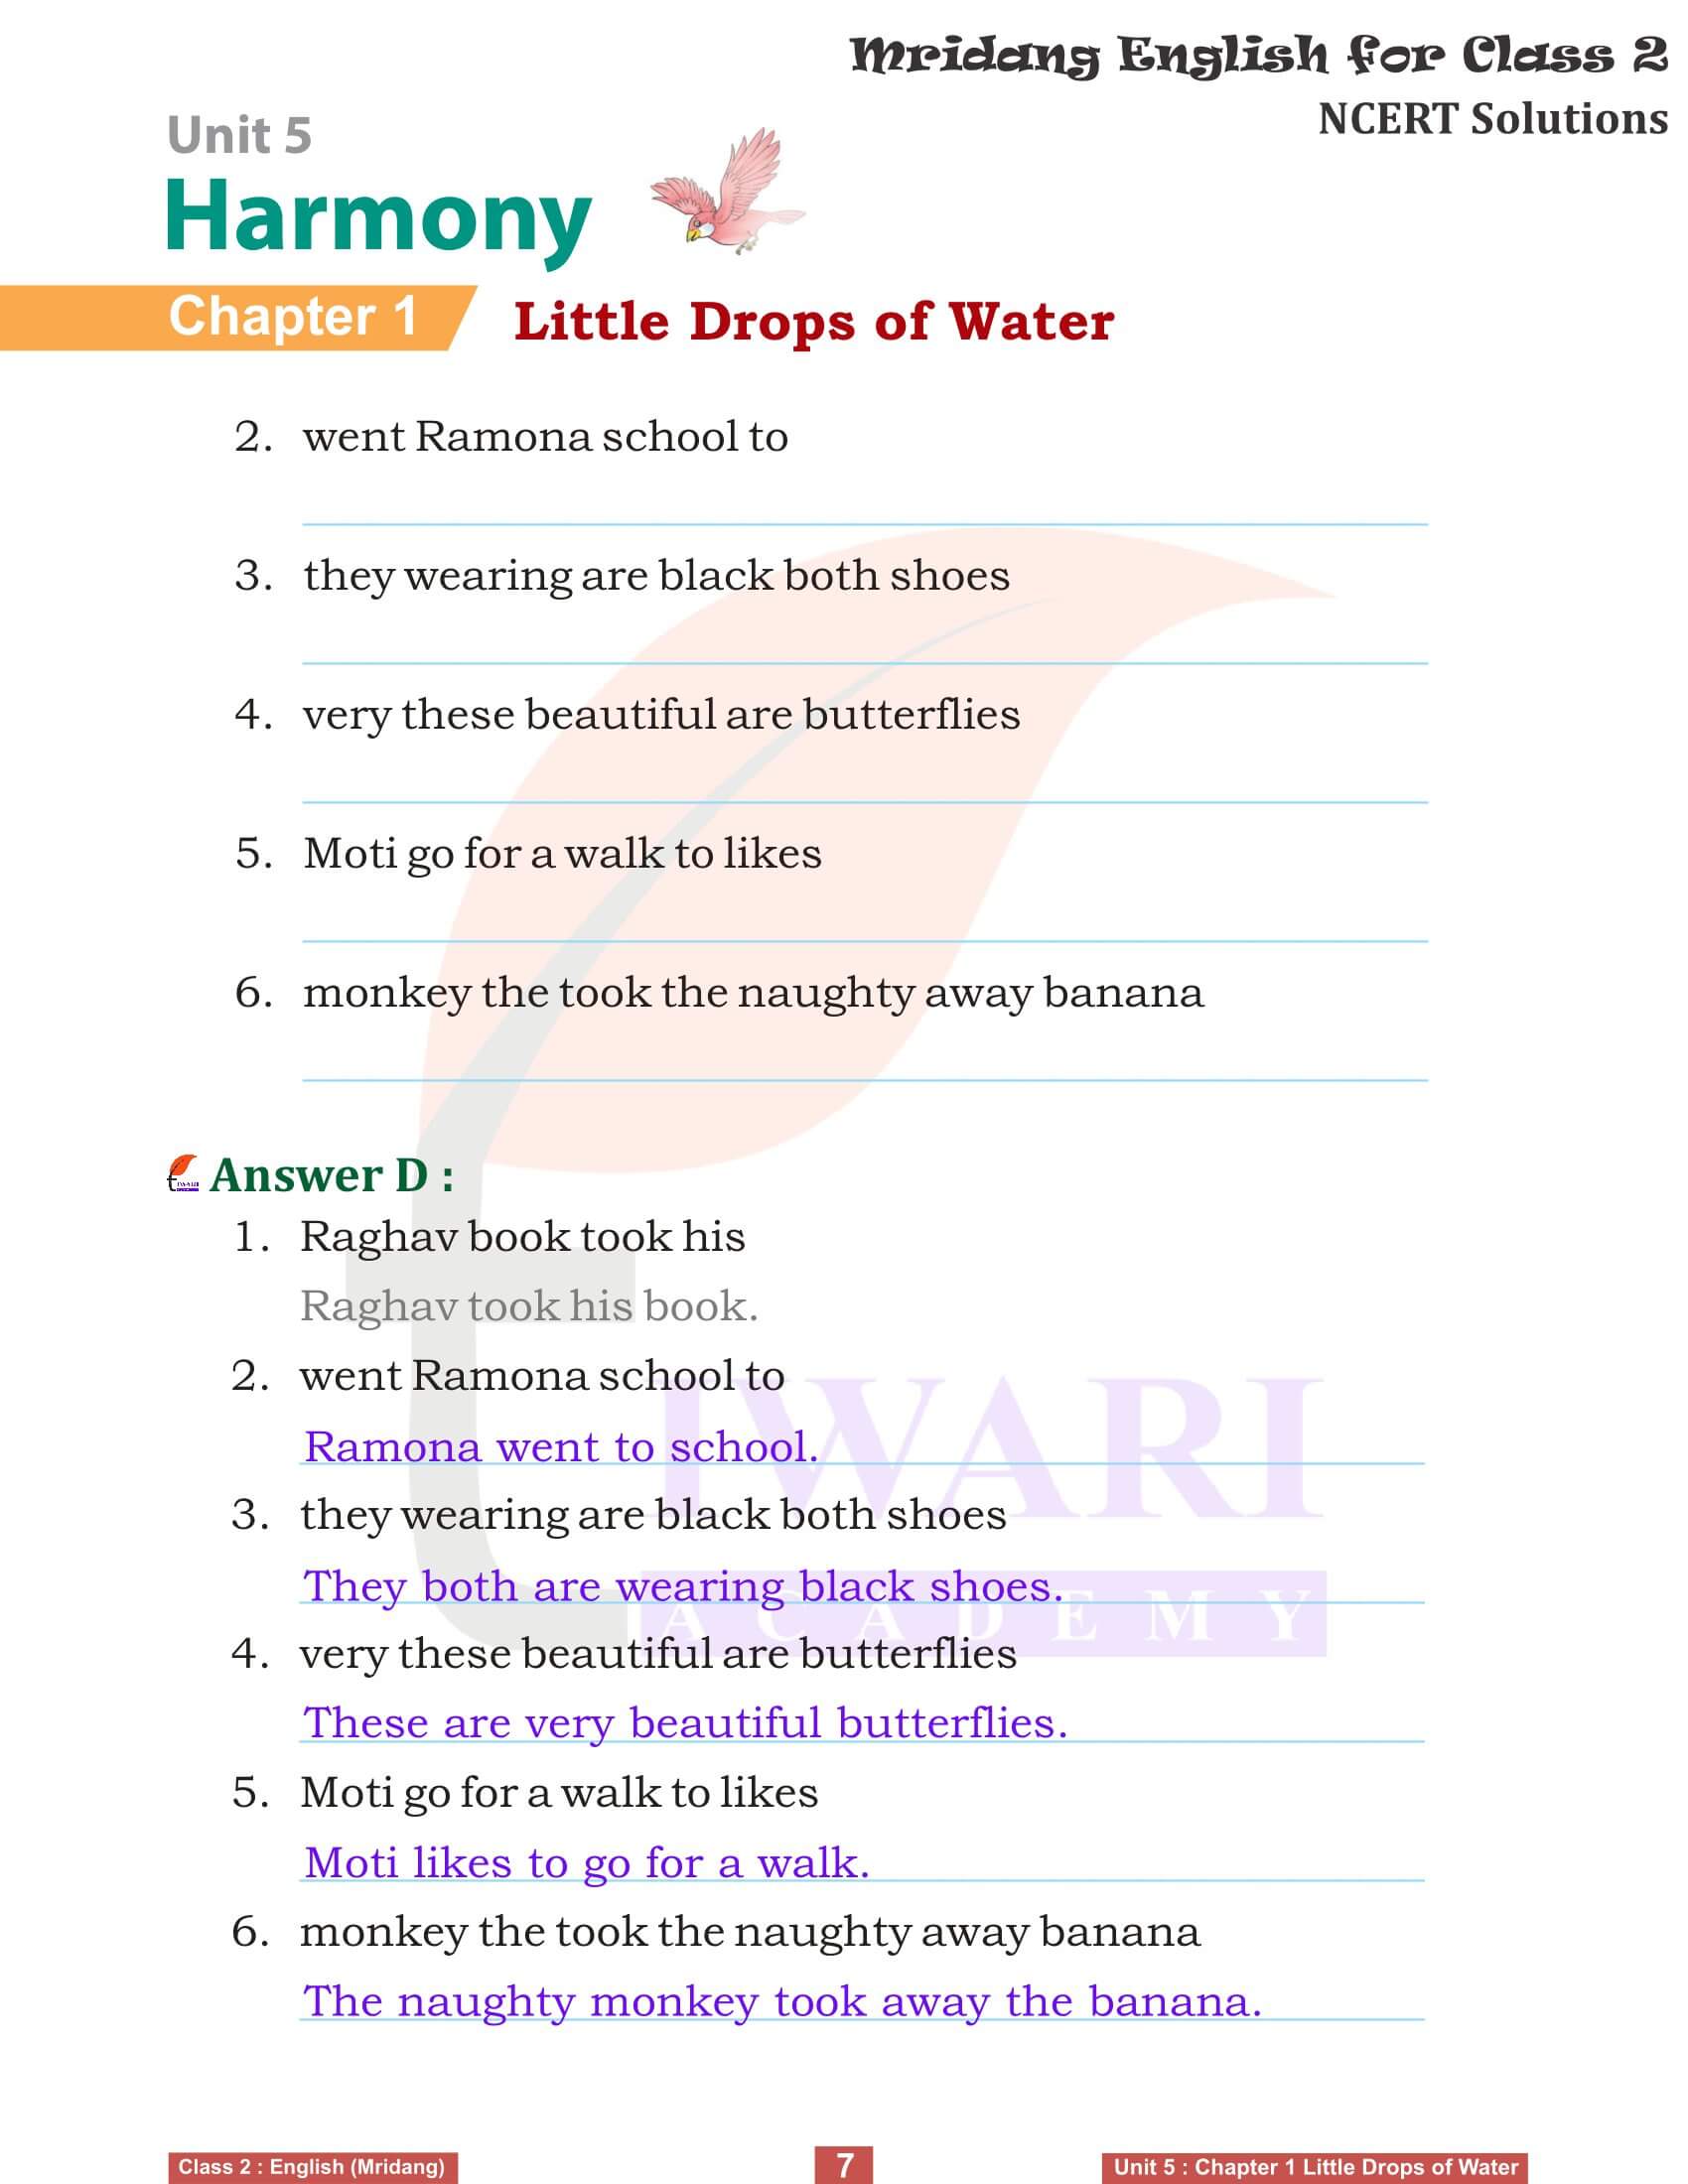 Class 2 English Mridang Unit 5 Harmony Chapter 1 NCERT Solutions